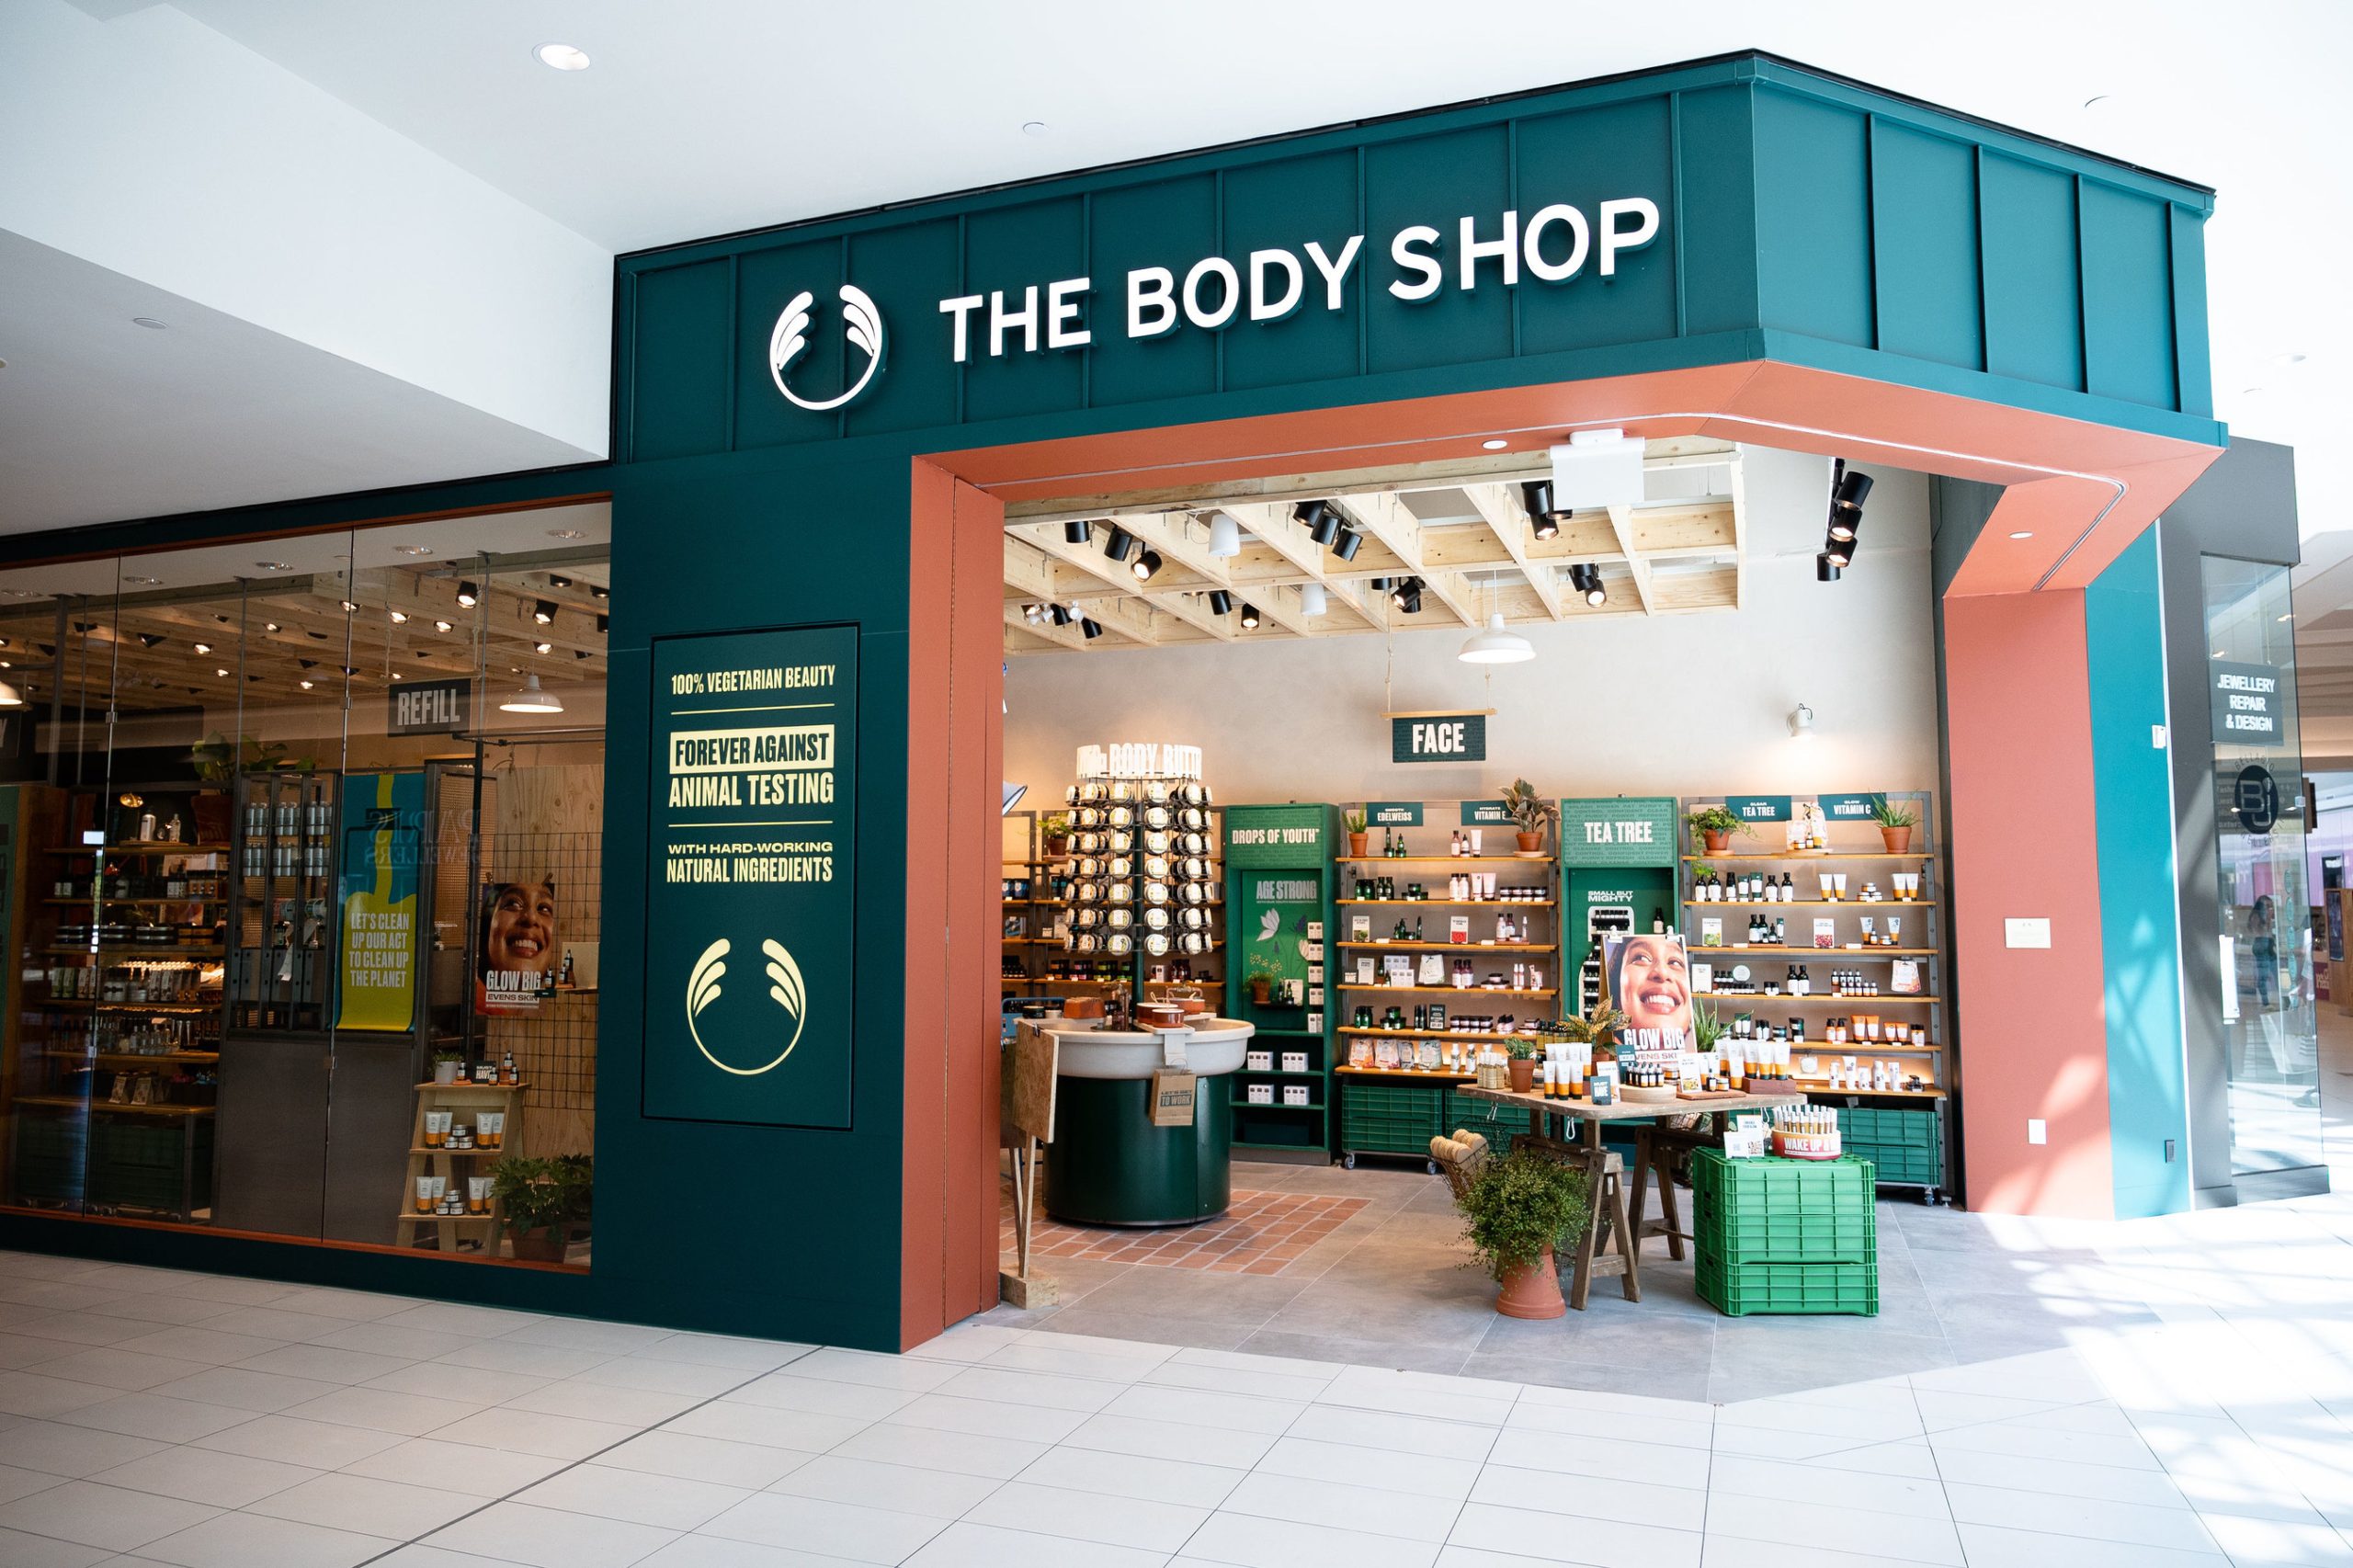 Exploring The Body Shop Website: A Comprehensive Review of Their Cosmetics, Toiletries, and Accessories